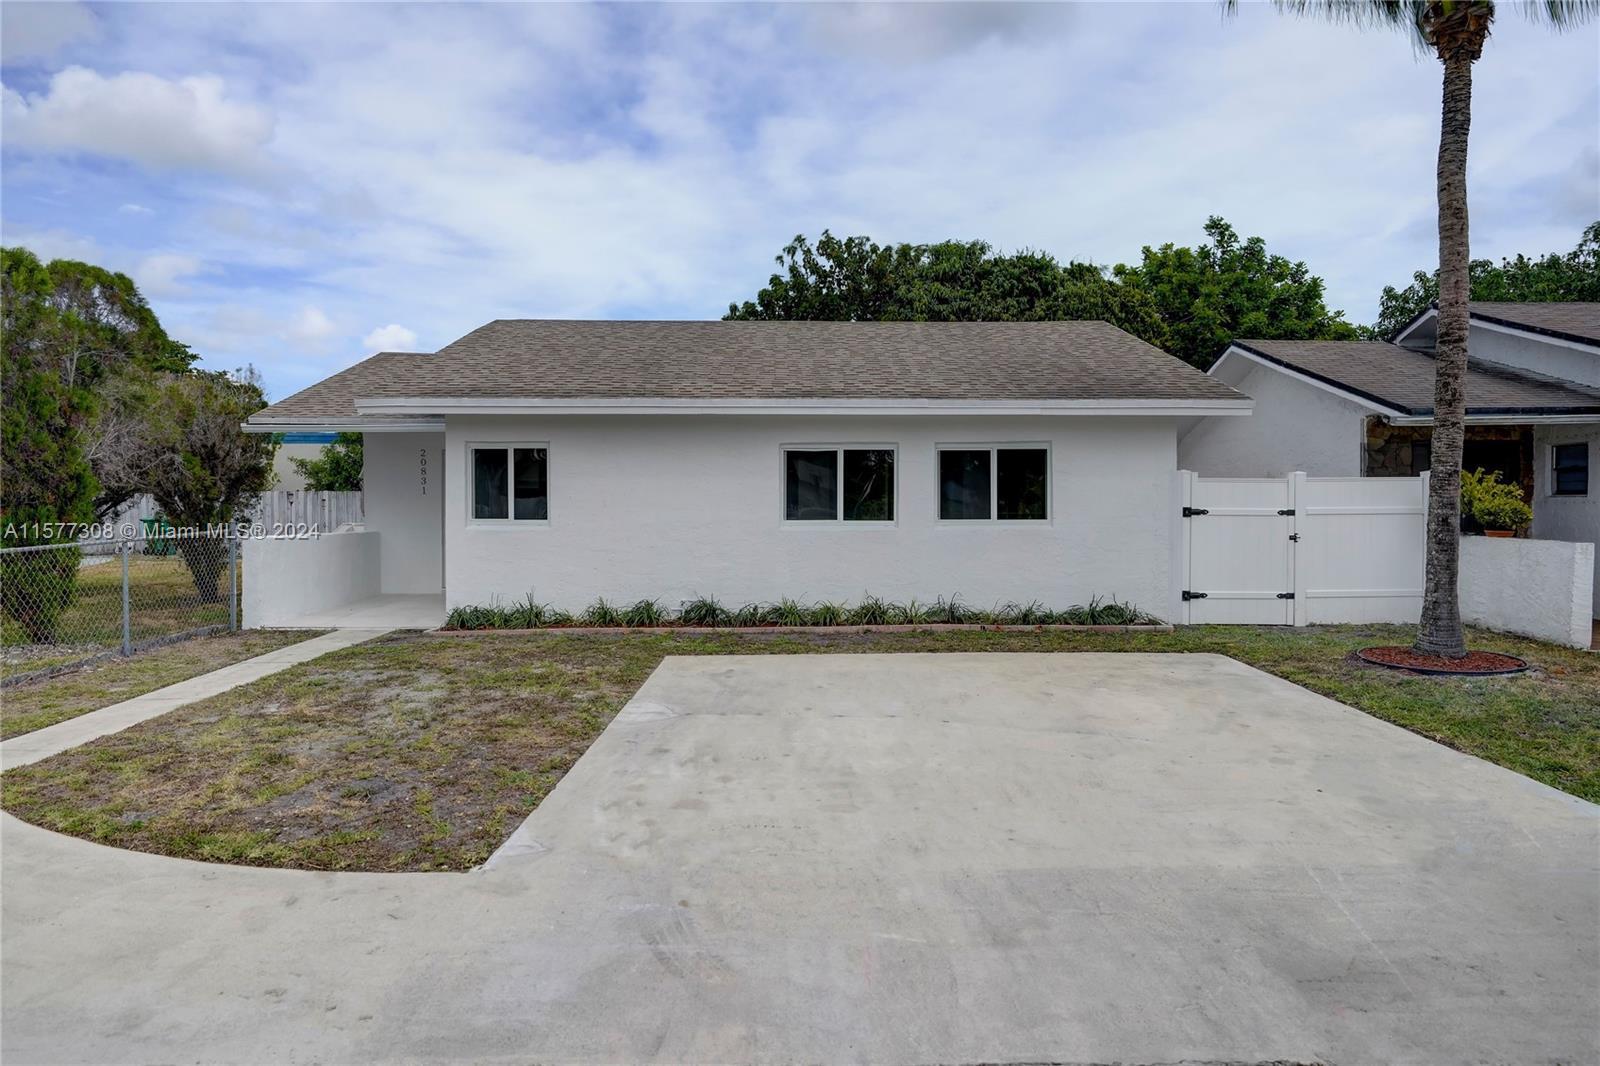 Photo of 20831 NW 28th Ave in Miami Gardens, FL